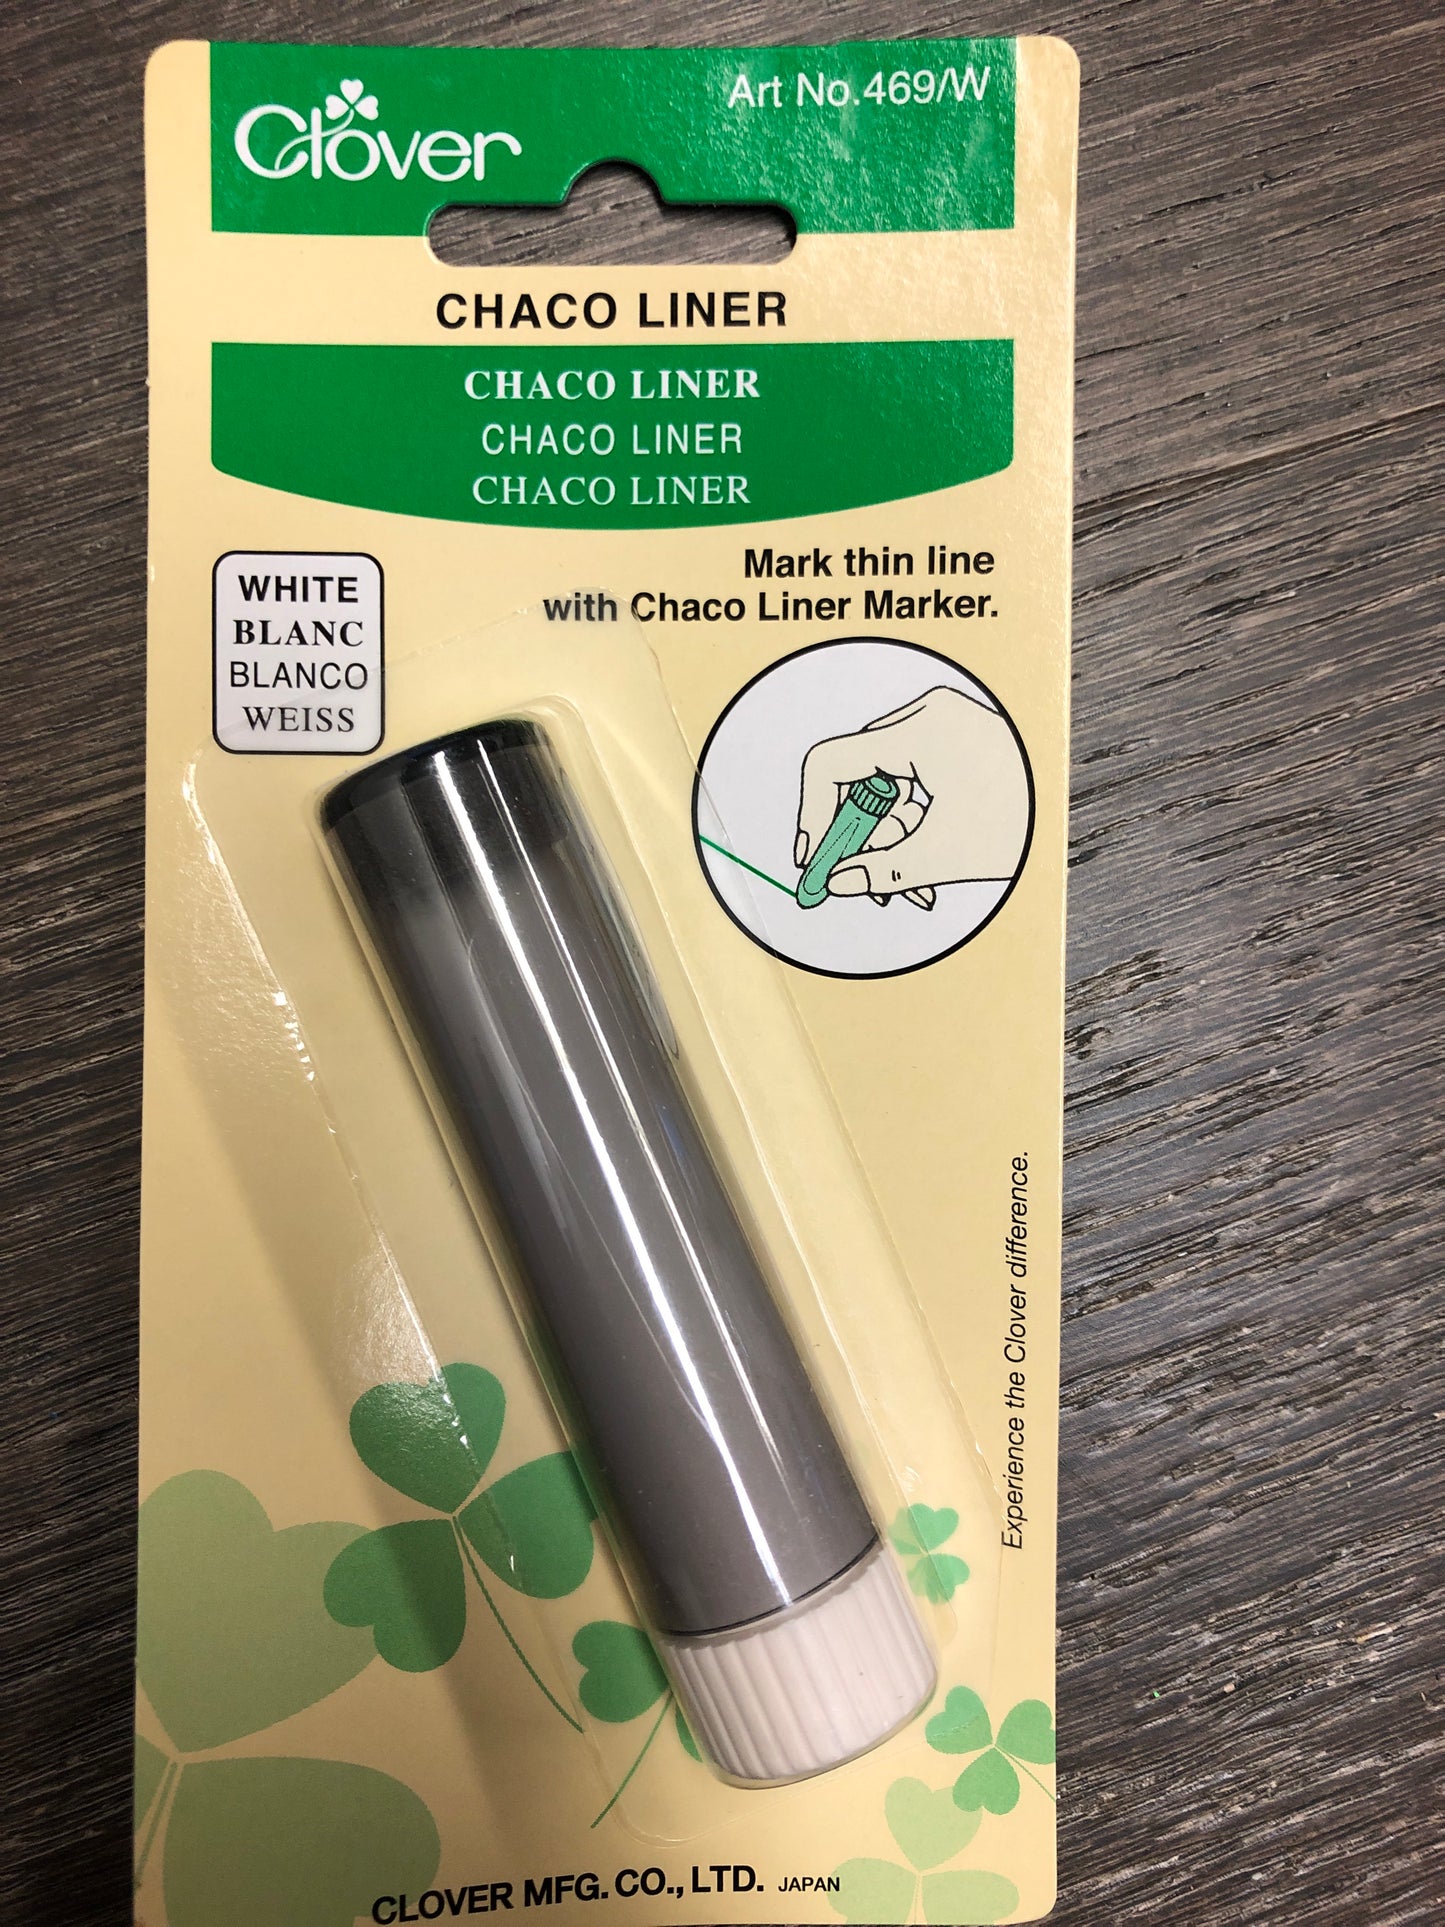 Chaco Liner by Clover